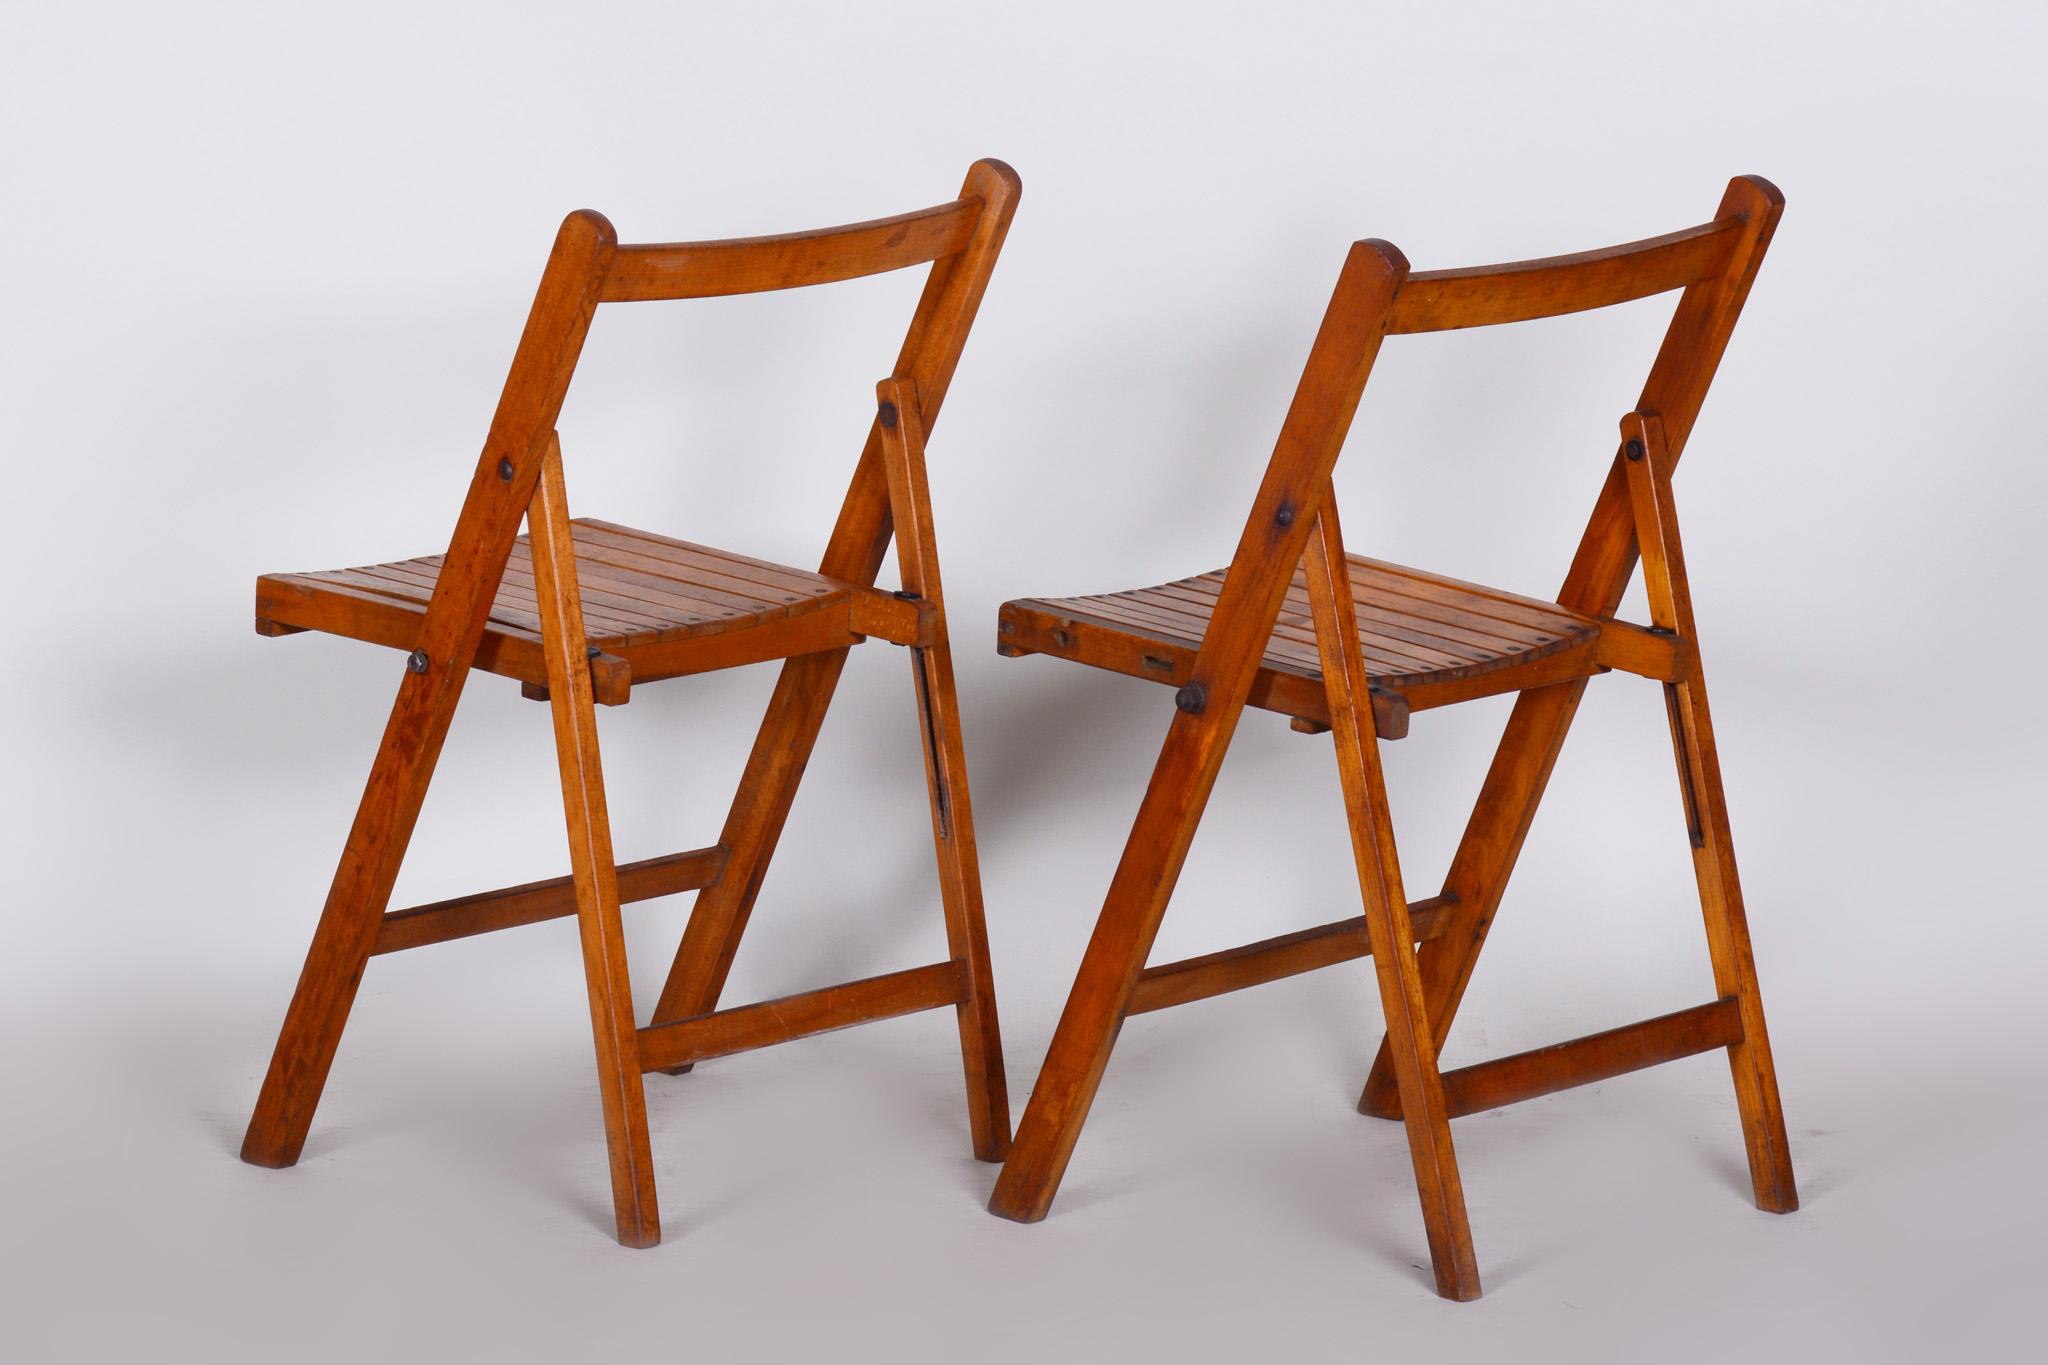 Czech Midcentury Beech Chairs, Original Condition, 1950s, 3 Pieces In Fair Condition For Sale In Horomerice, CZ